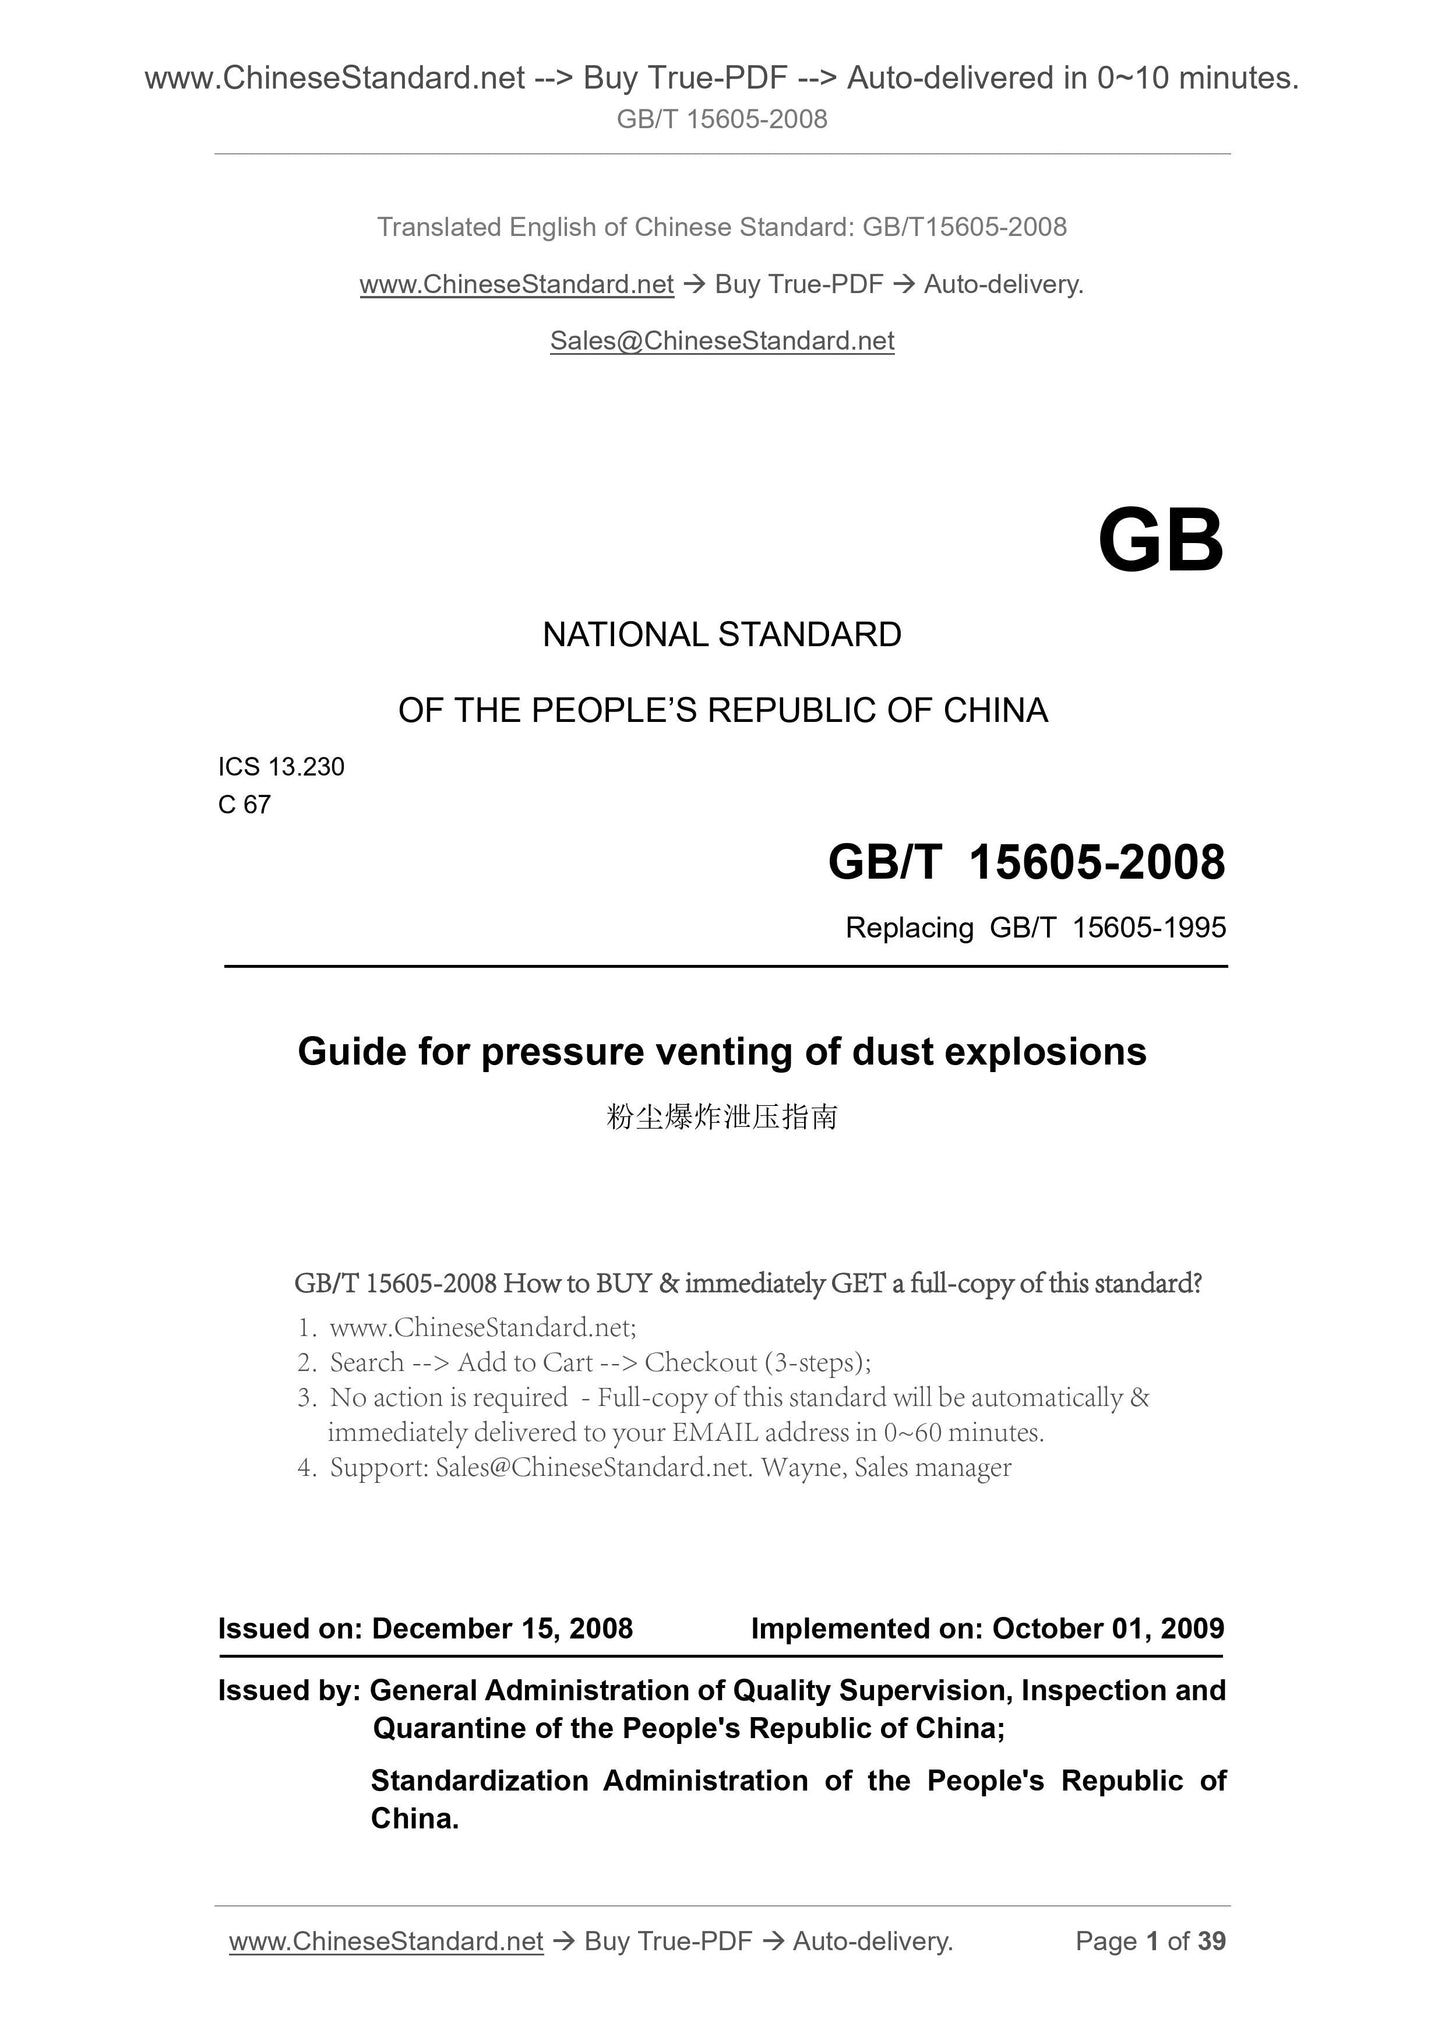 GB/T 15605-2008 Page 1